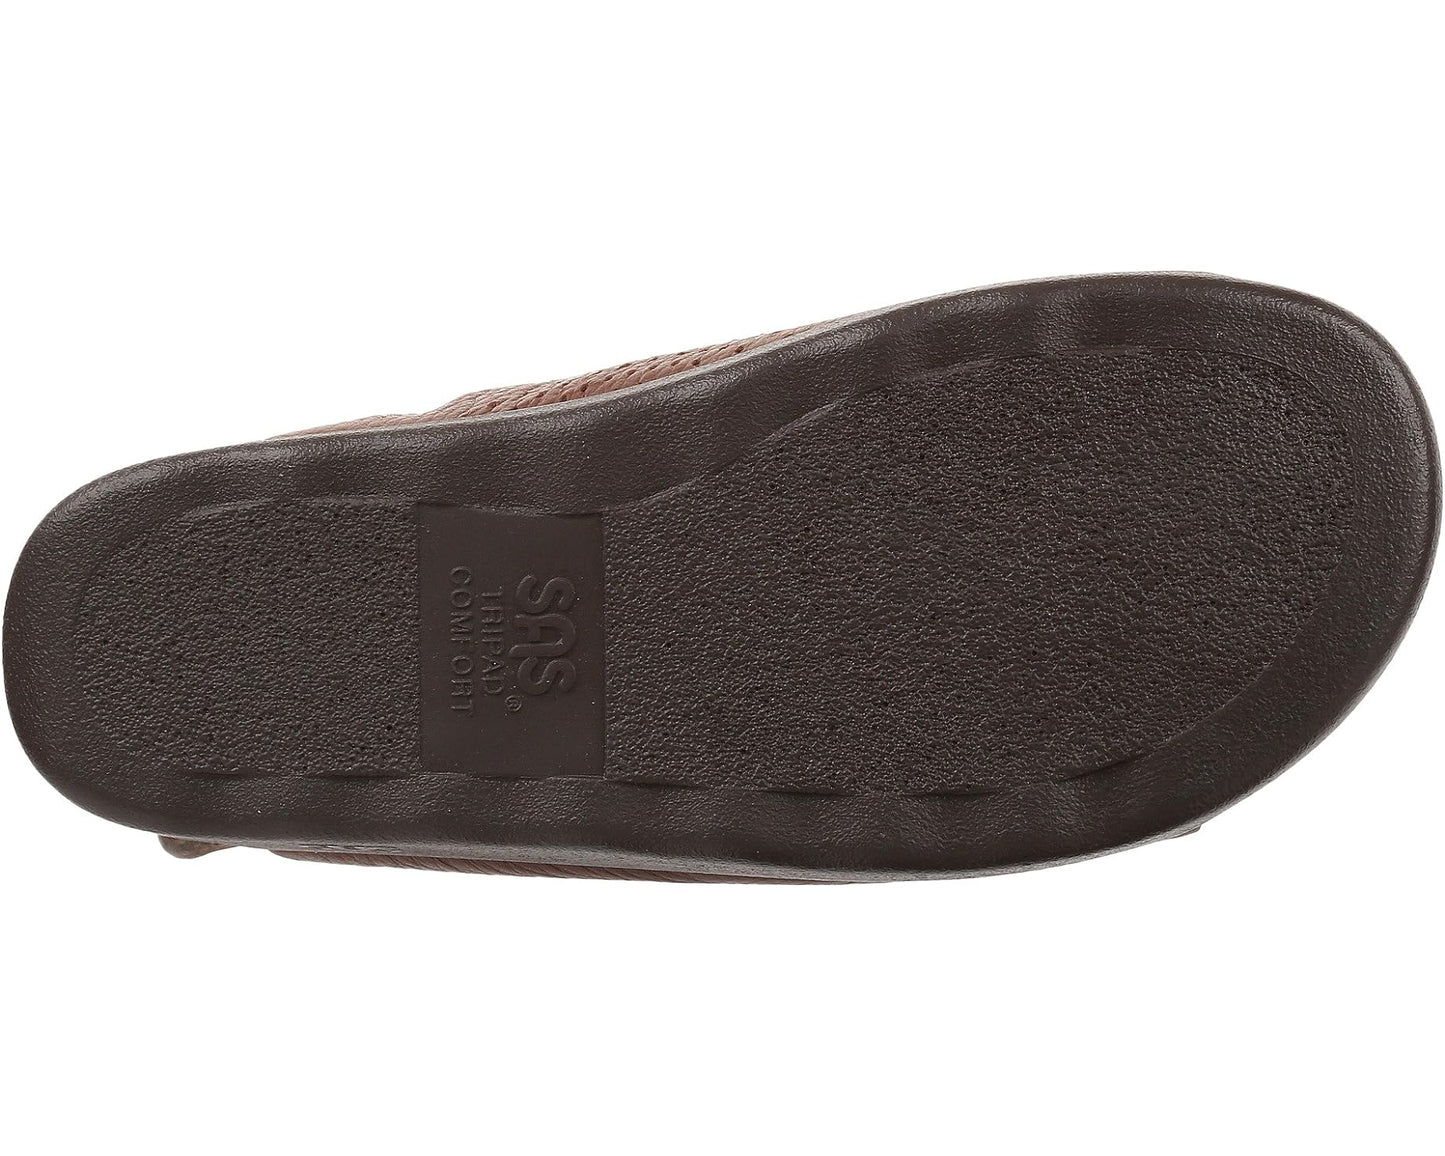 COZY S.A.S -AMBER | SAS COZY-AMBER  WOMENS FOOTWEAR MADE IN USA Brandy's Shoes